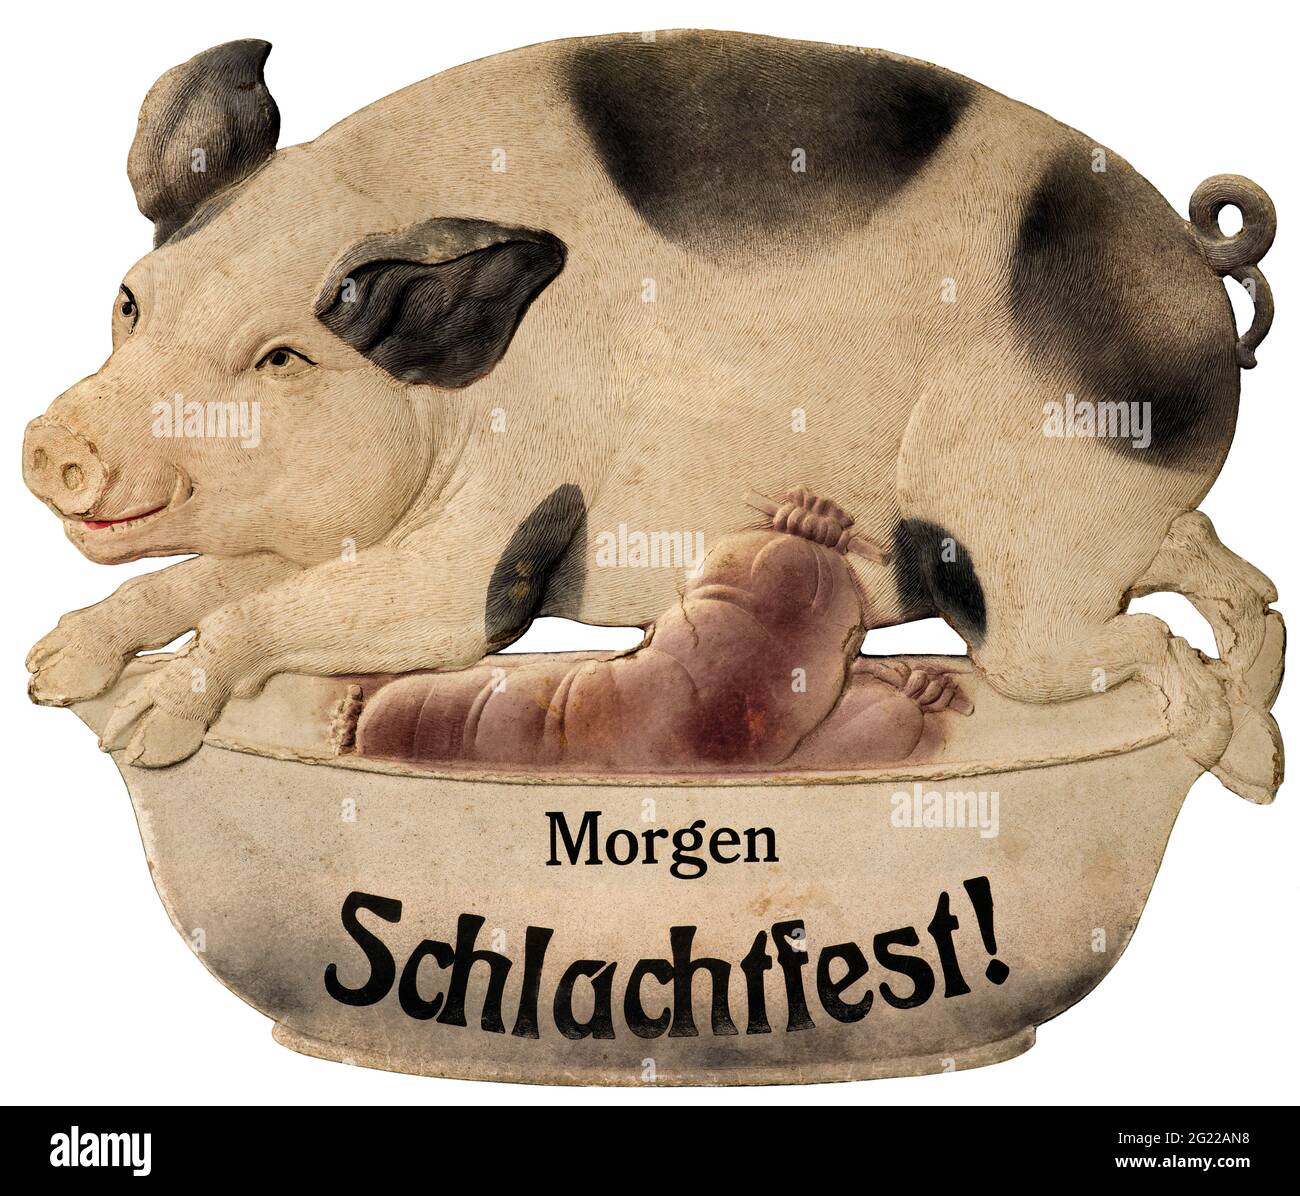 agriculture, 'Morgen Schlachtfest' (Tomorrow slaughtering day), cardboard sign, Germany, circa 1910, ADDITIONAL-RIGHTS-CLEARANCE-INFO-NOT-AVAILABLE Stock Photo